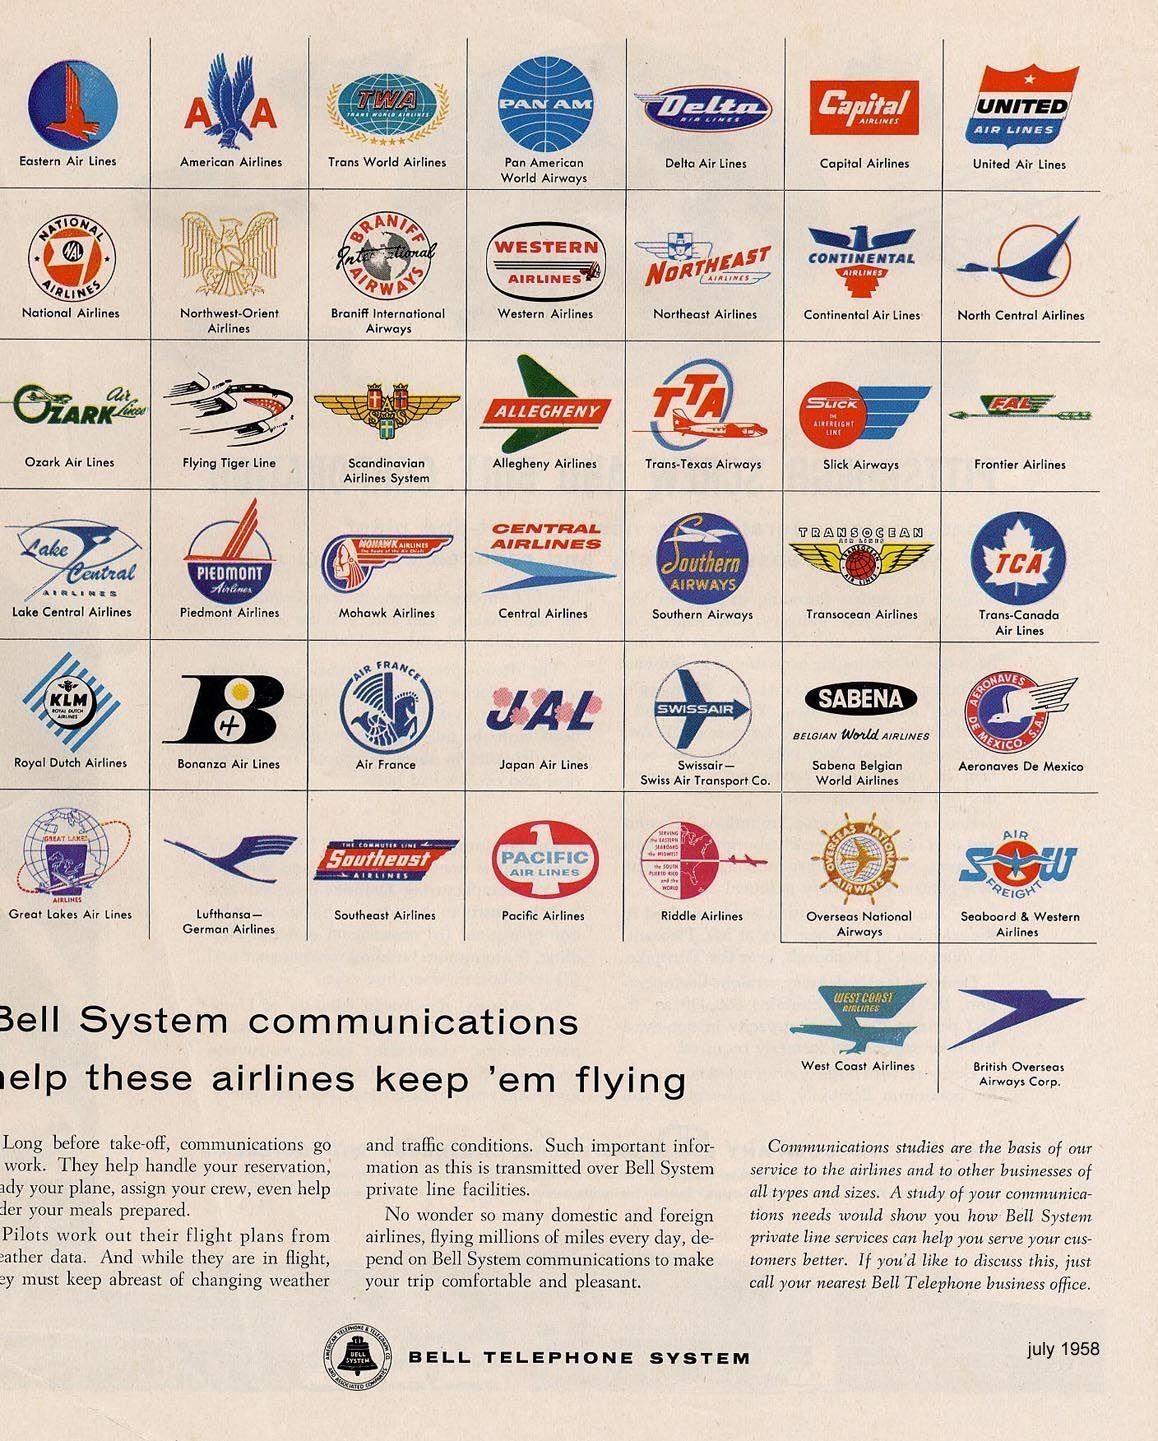 Important Airline Logo - airline logos | U.S. Airlines | Airline logo, Travel posters ...